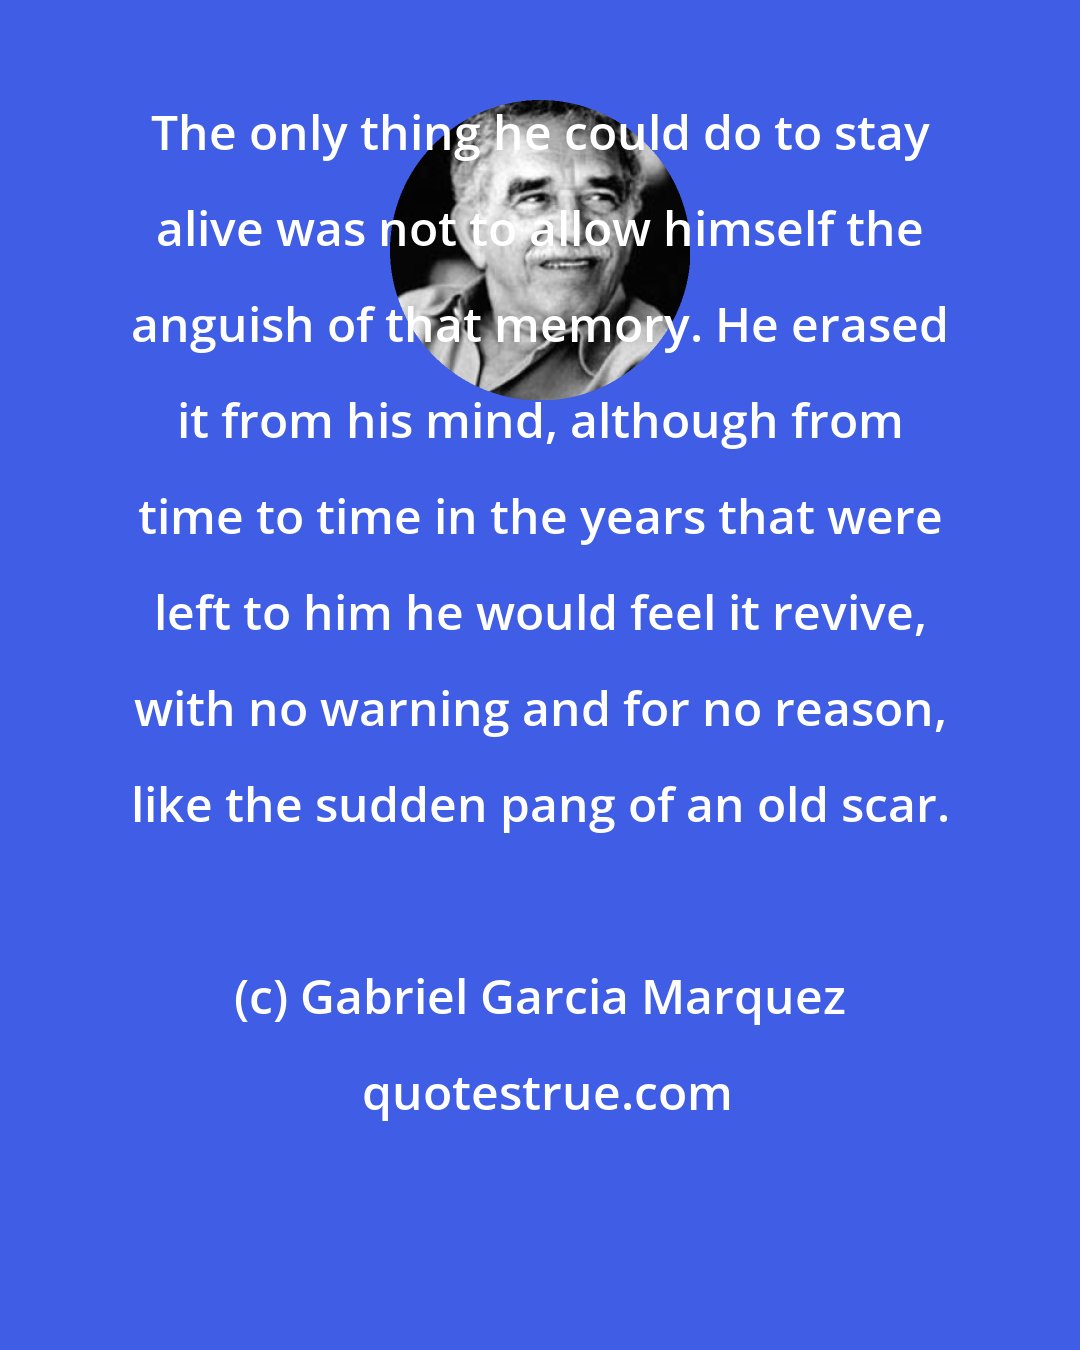 Gabriel Garcia Marquez: The only thing he could do to stay alive was not to allow himself the anguish of that memory. He erased it from his mind, although from time to time in the years that were left to him he would feel it revive, with no warning and for no reason, like the sudden pang of an old scar.